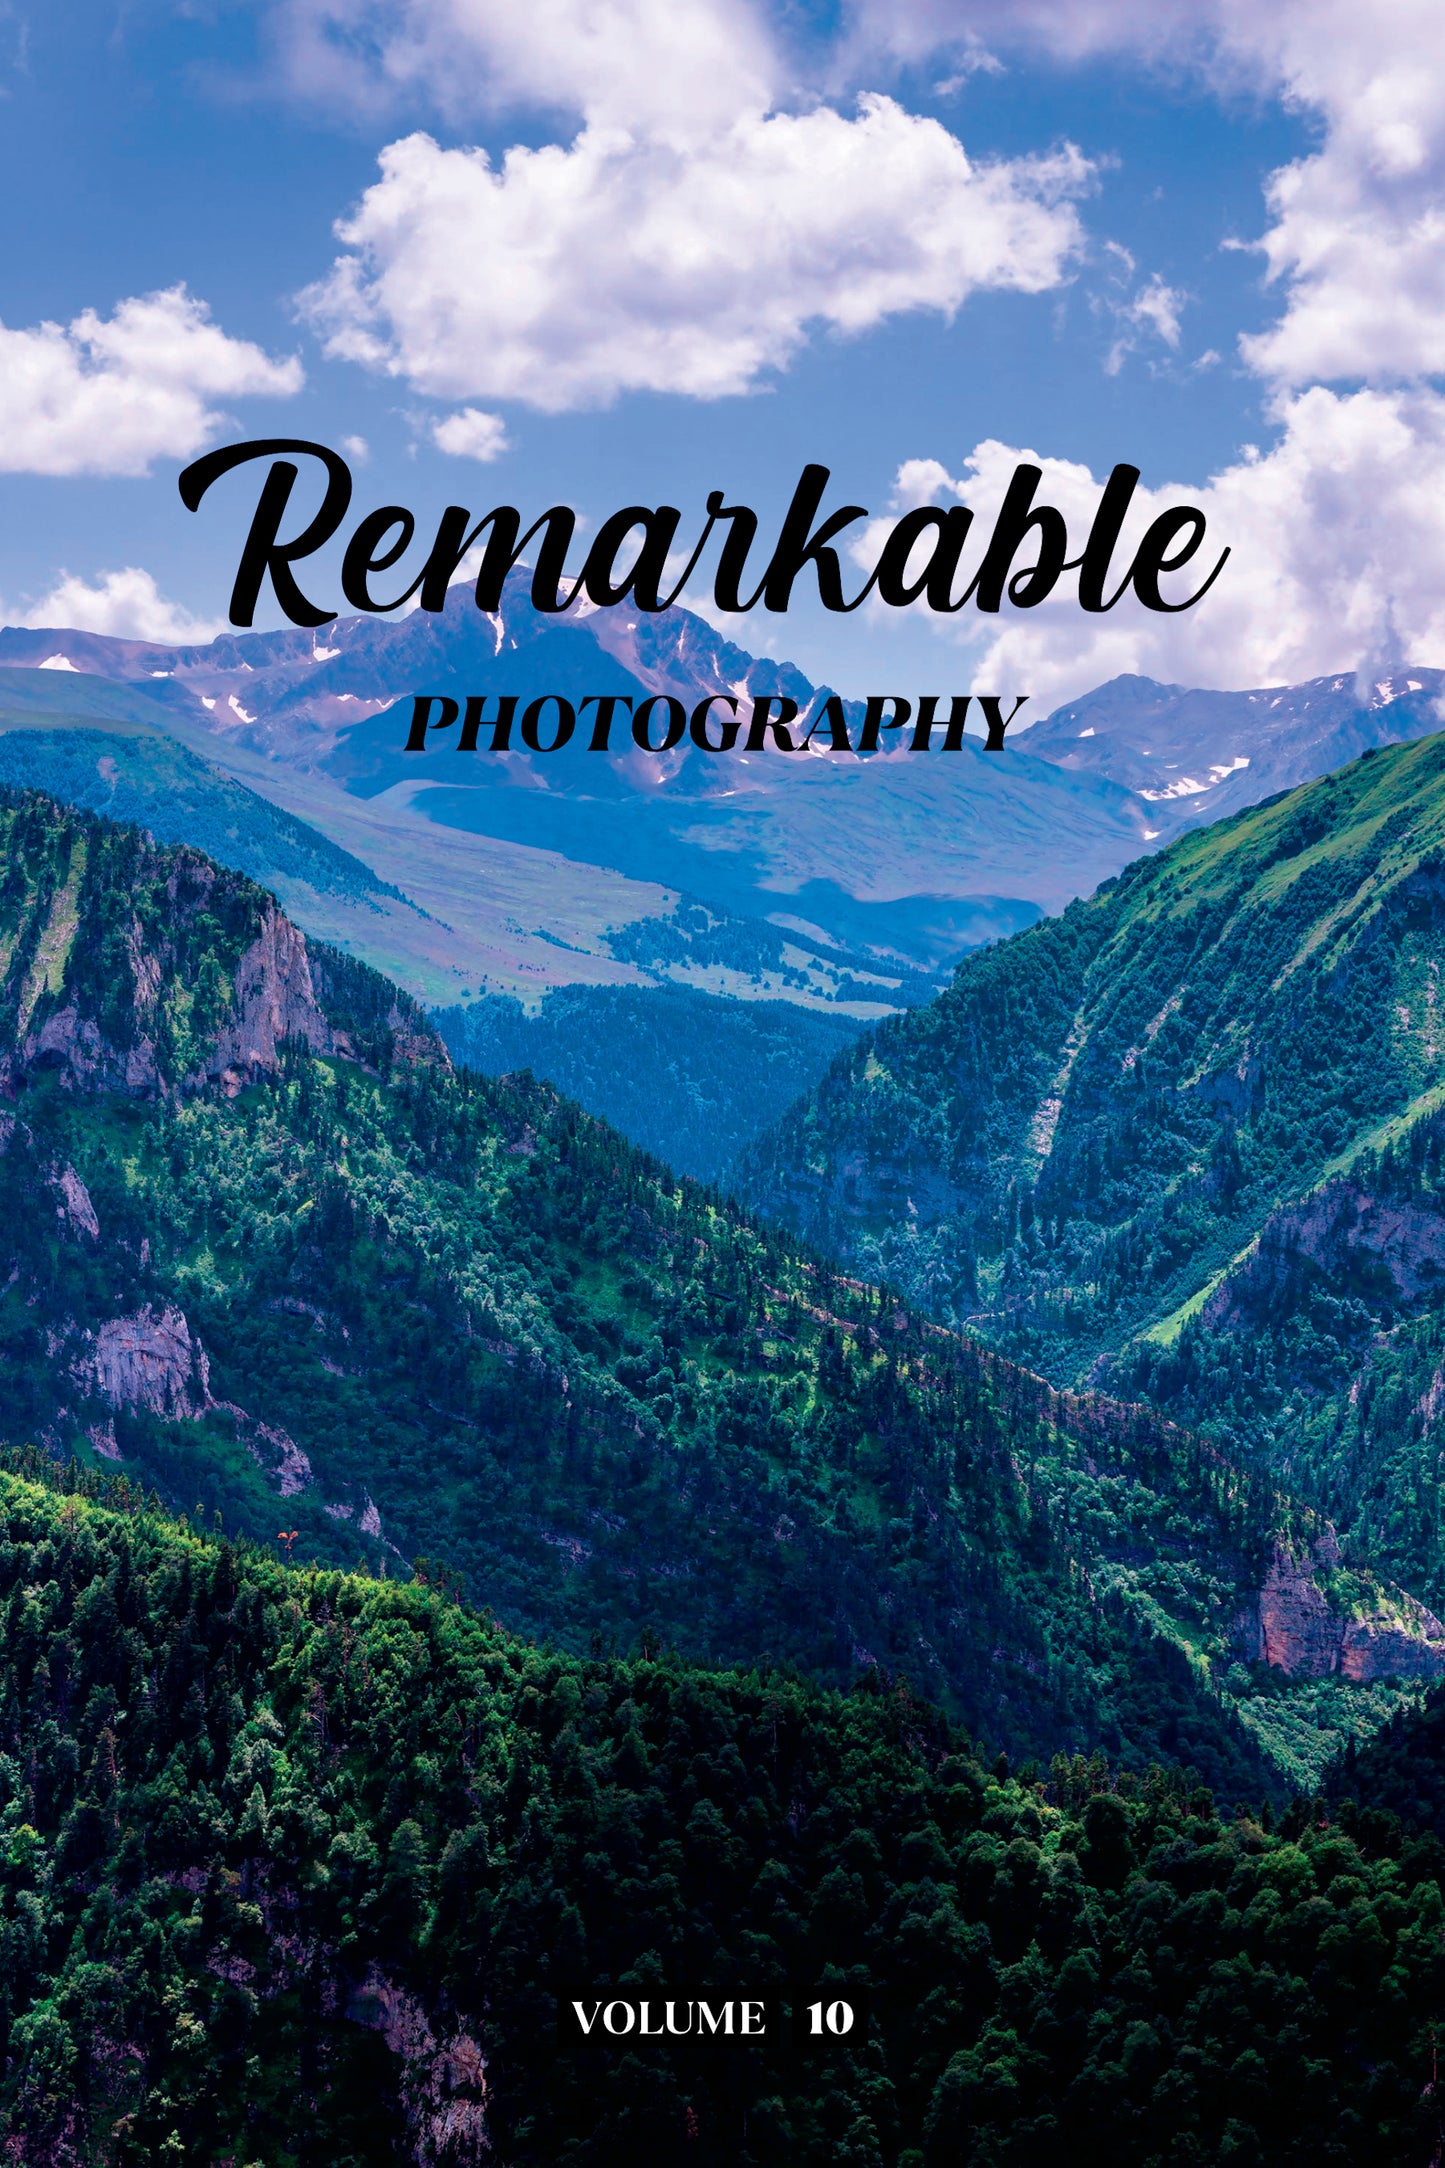 Remarkable Photography Volume 10 (Physical Book)